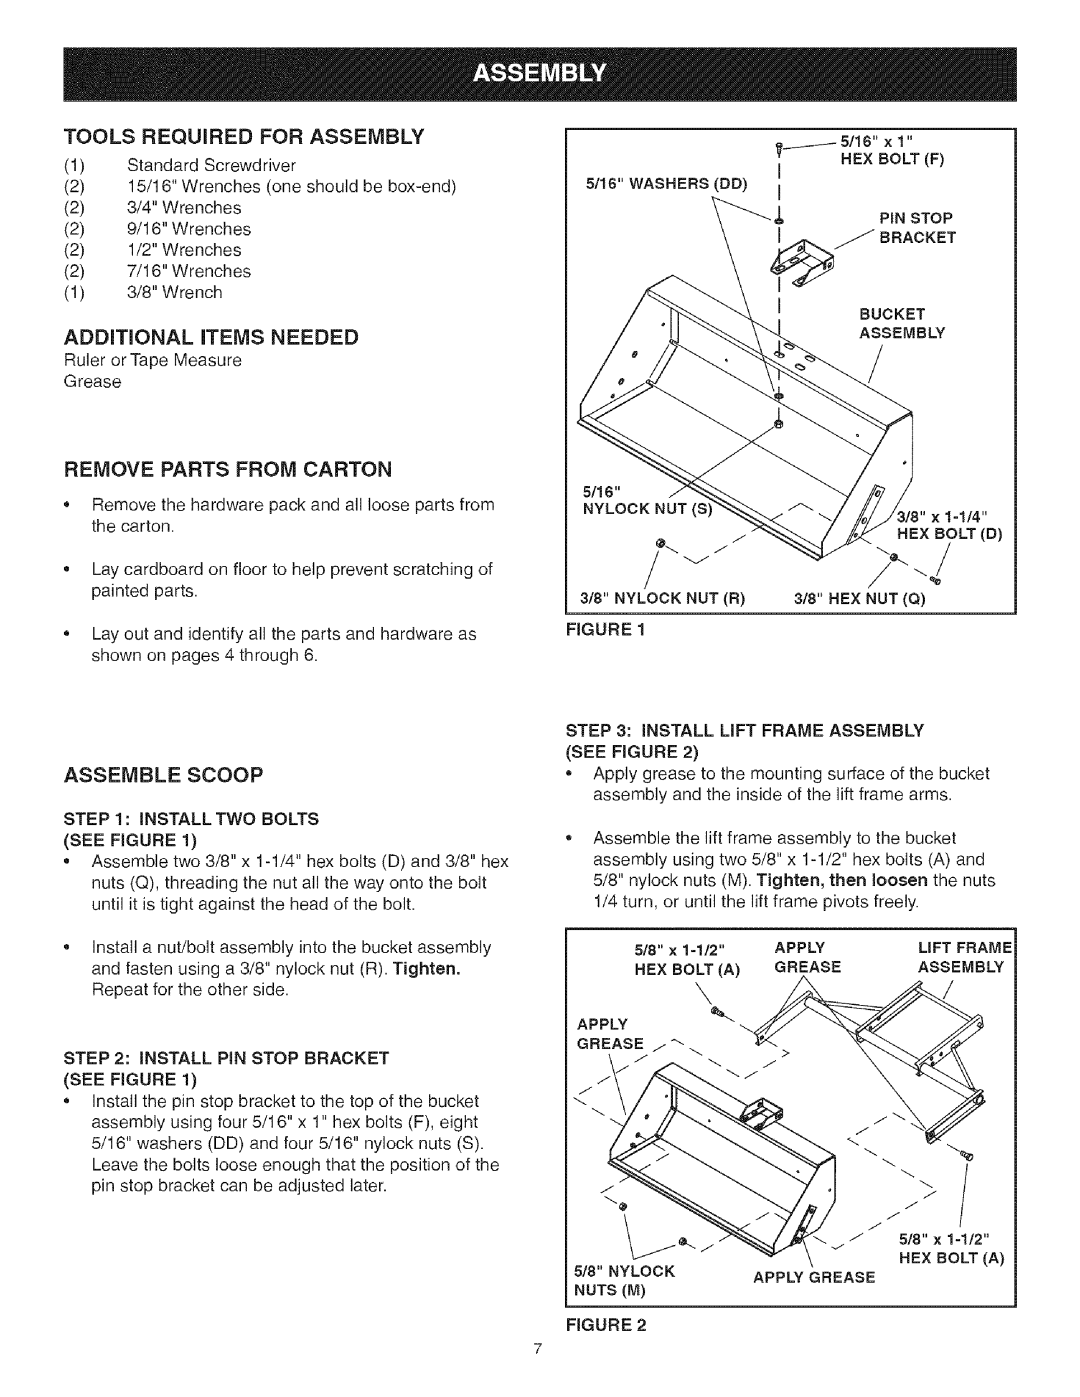 Craftsman 486.248473 manual Tools Required For Assembly, Remove Parts From Carton, Assemble Scoop, ADDITIONAL iTEMS NEEDED 